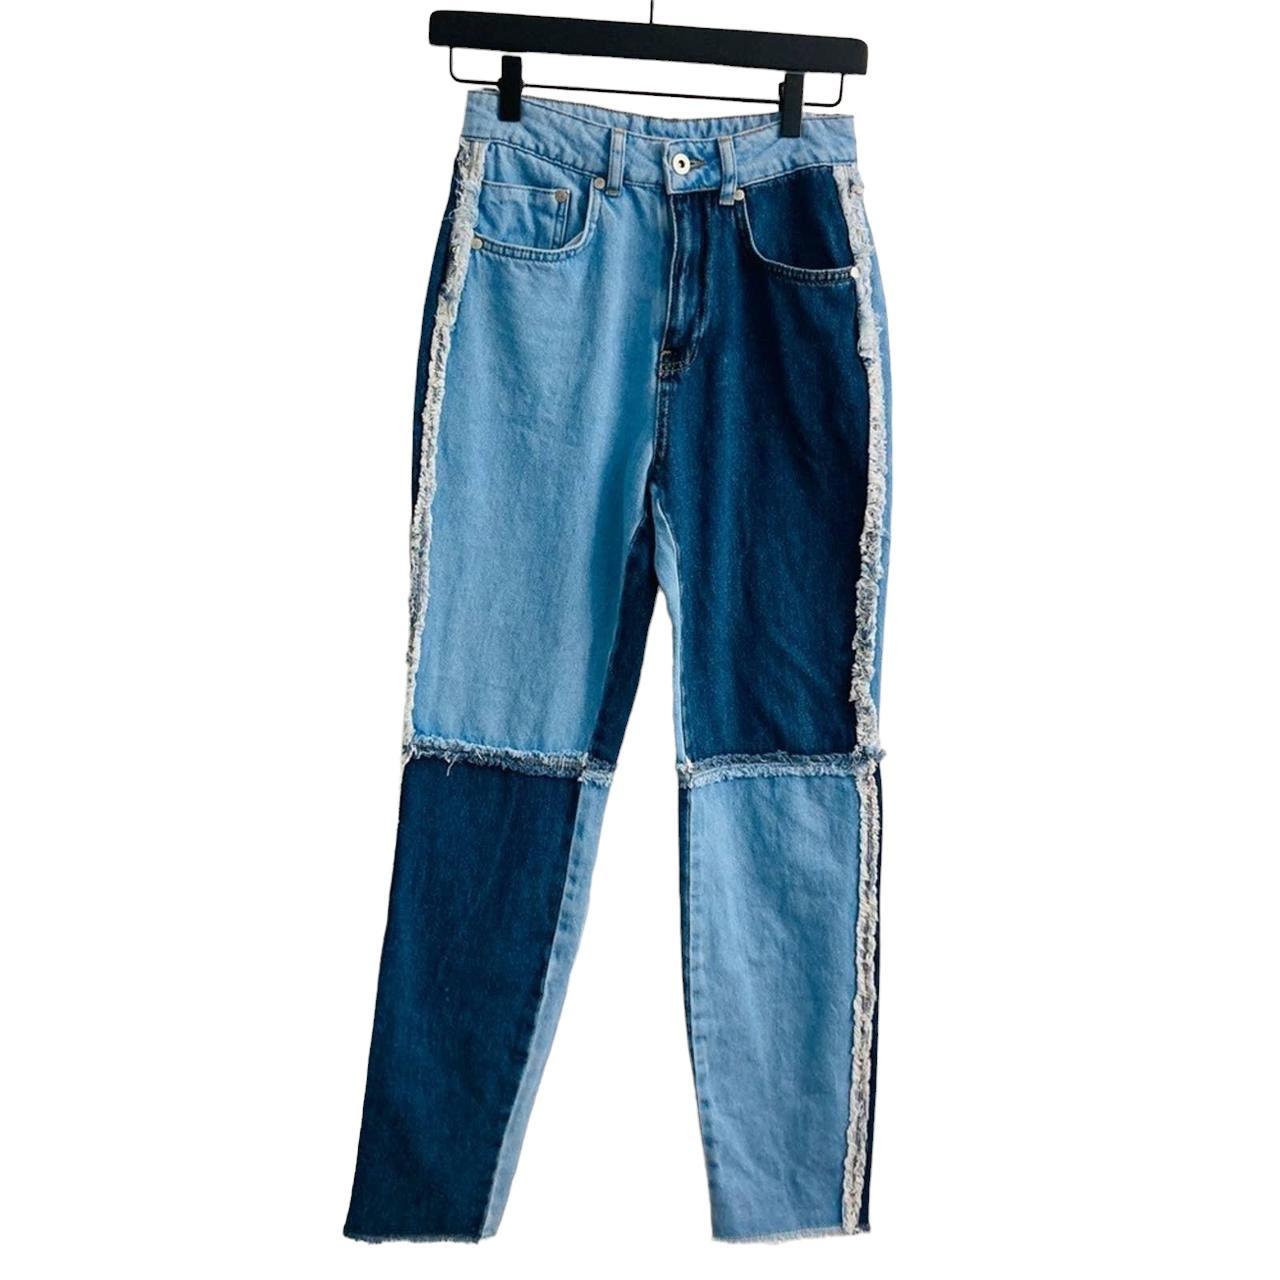 Product Image 1 - Patchwork Indie Jeans

Brand: Ragged Priest

Size: